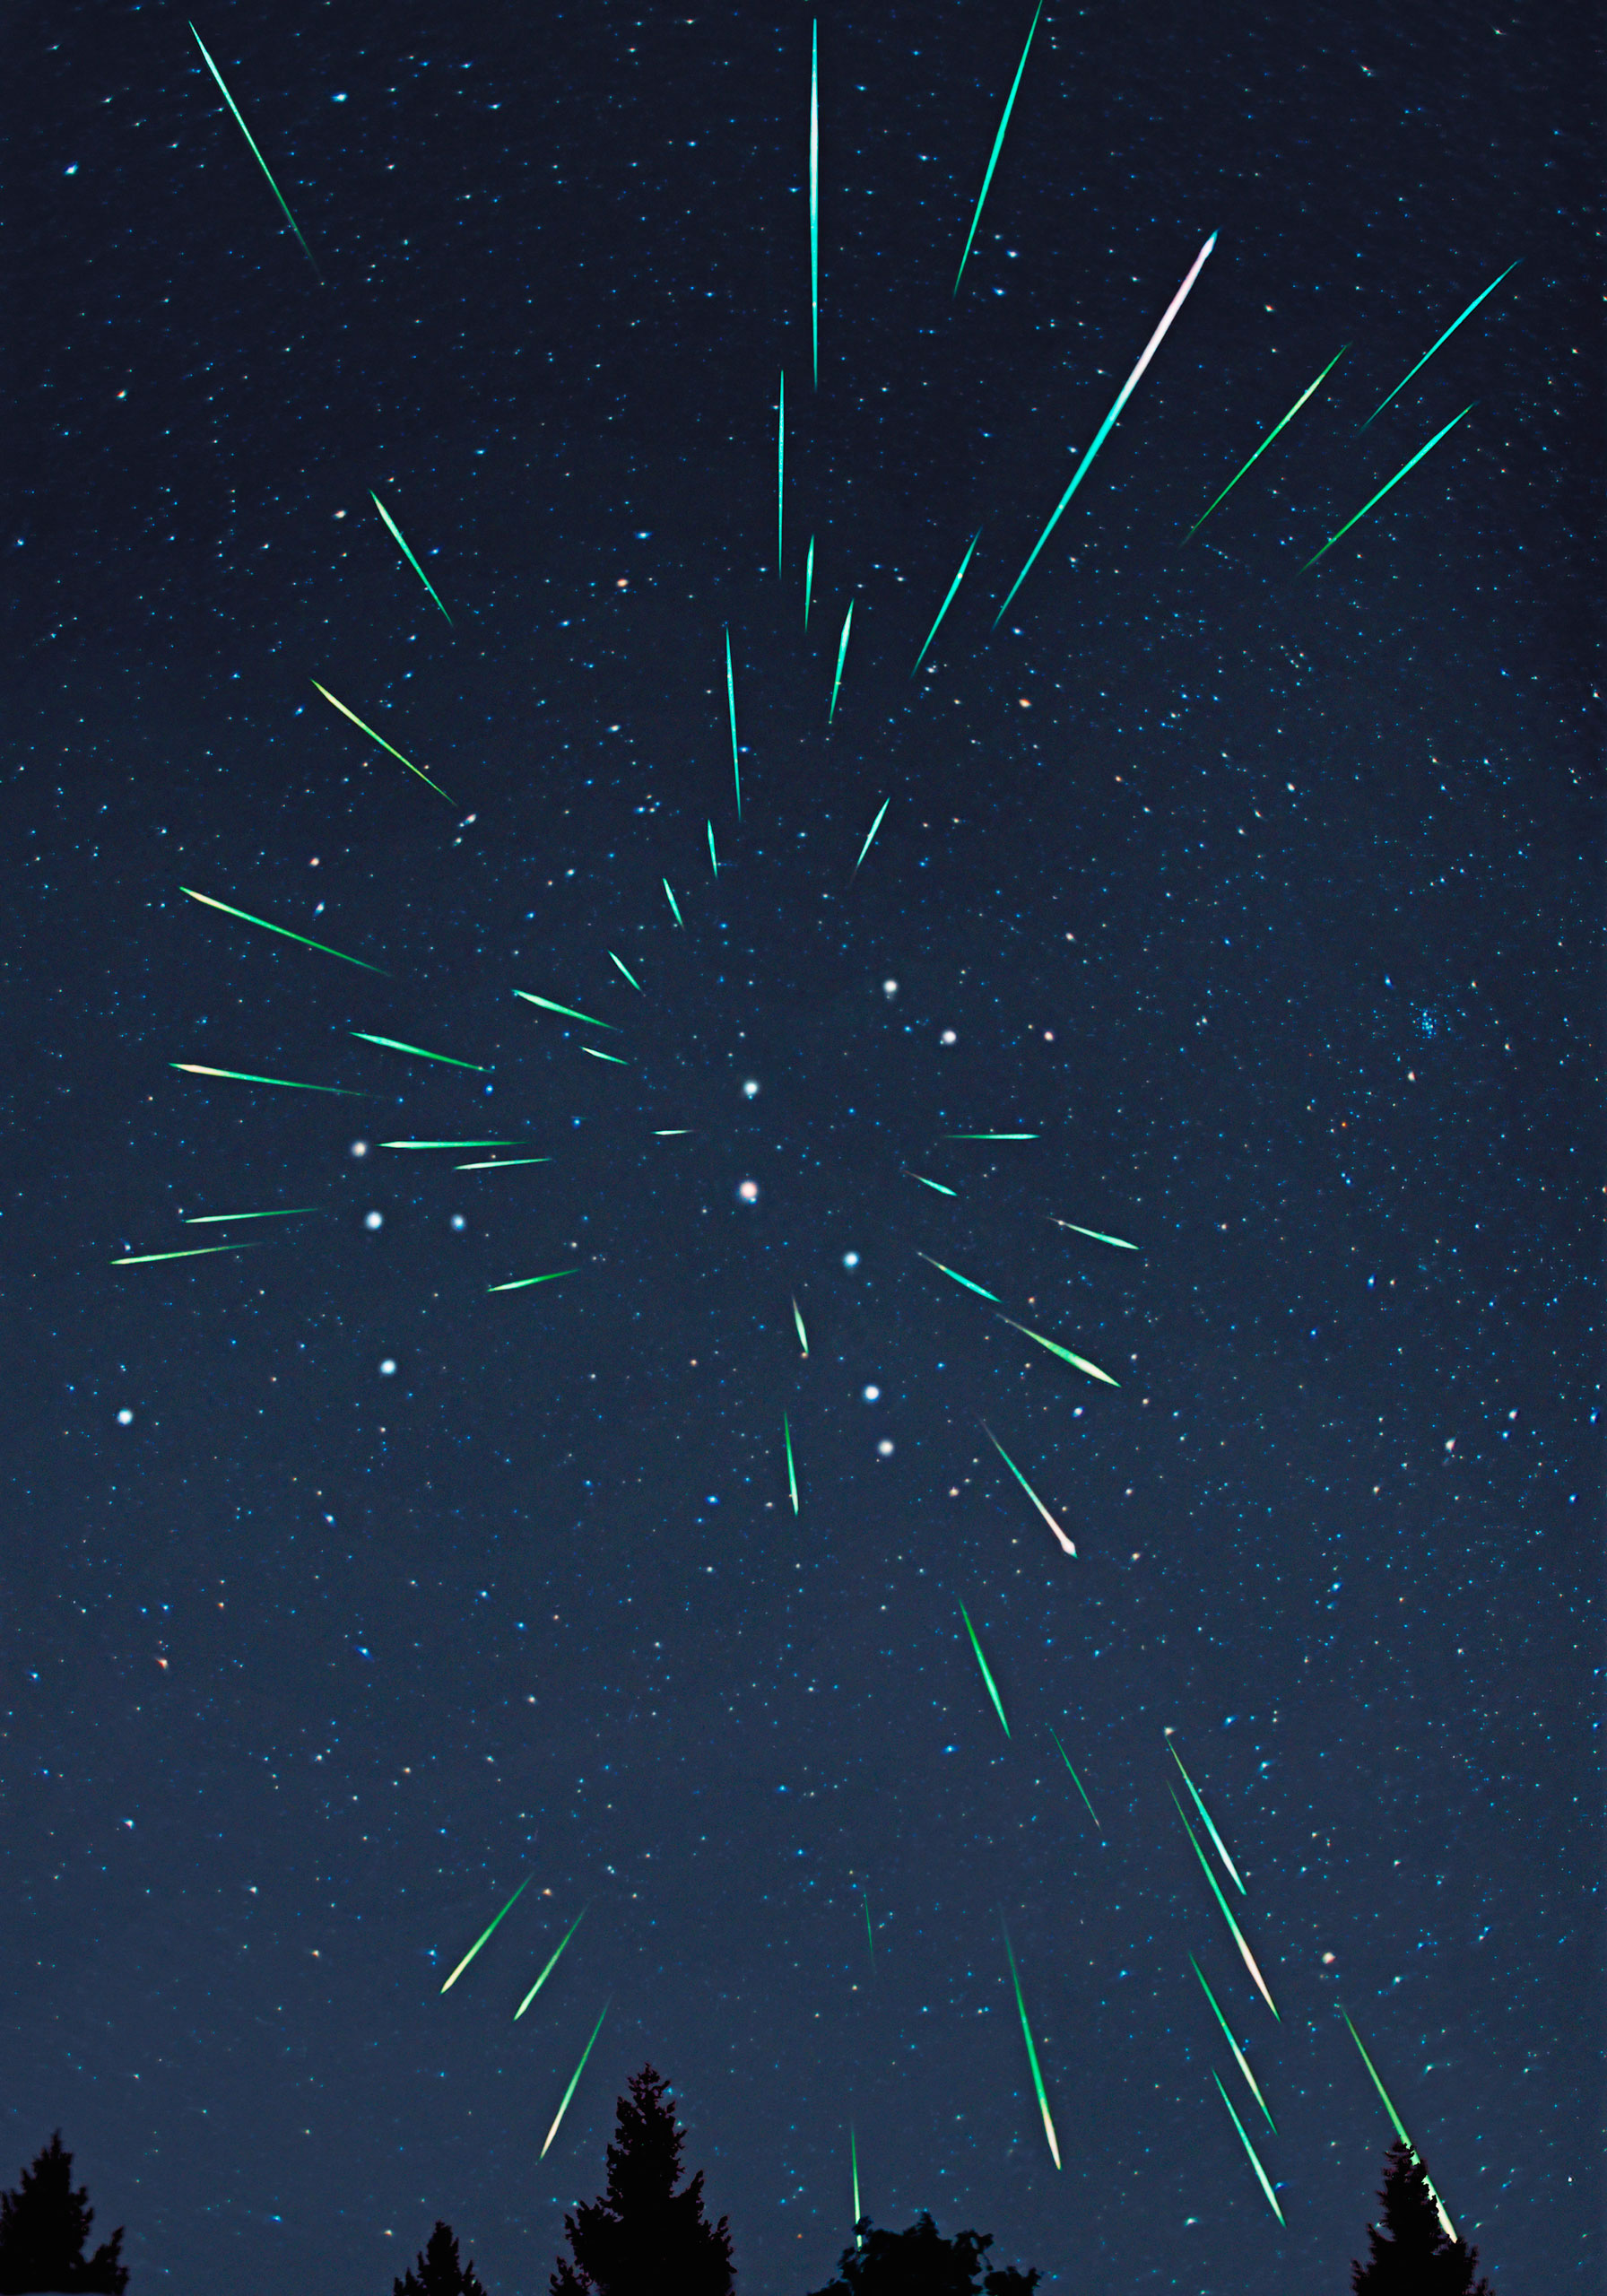 A multiple exposure of a Leonid meteor shower.